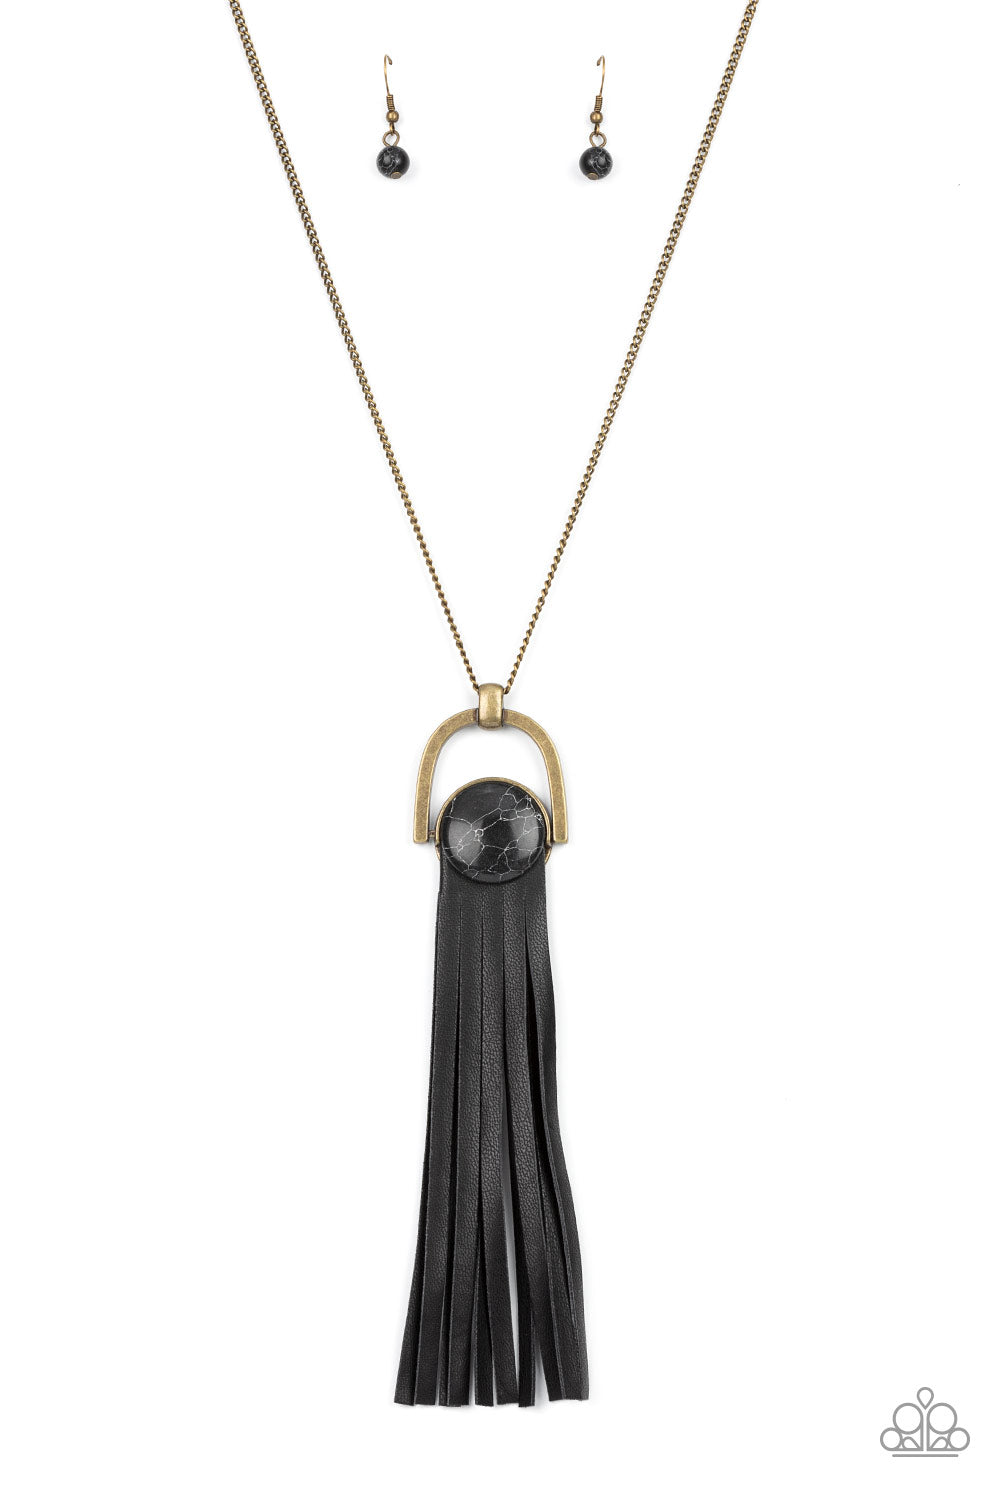 Winslow Wanderer - Brass and Leather Necklaces strips of black leather fan out from the bottom of a round black stone that is threaded along a metal rod that attaches to the bottom of a brass horseshoe frame. The earthy pendant swings from the bottom of an extended brass chain, resulting in a wildly wonderful tassel. Features an adjustable clasp closure.  Sold as one individual necklace. Includes one pair of matching earrings.